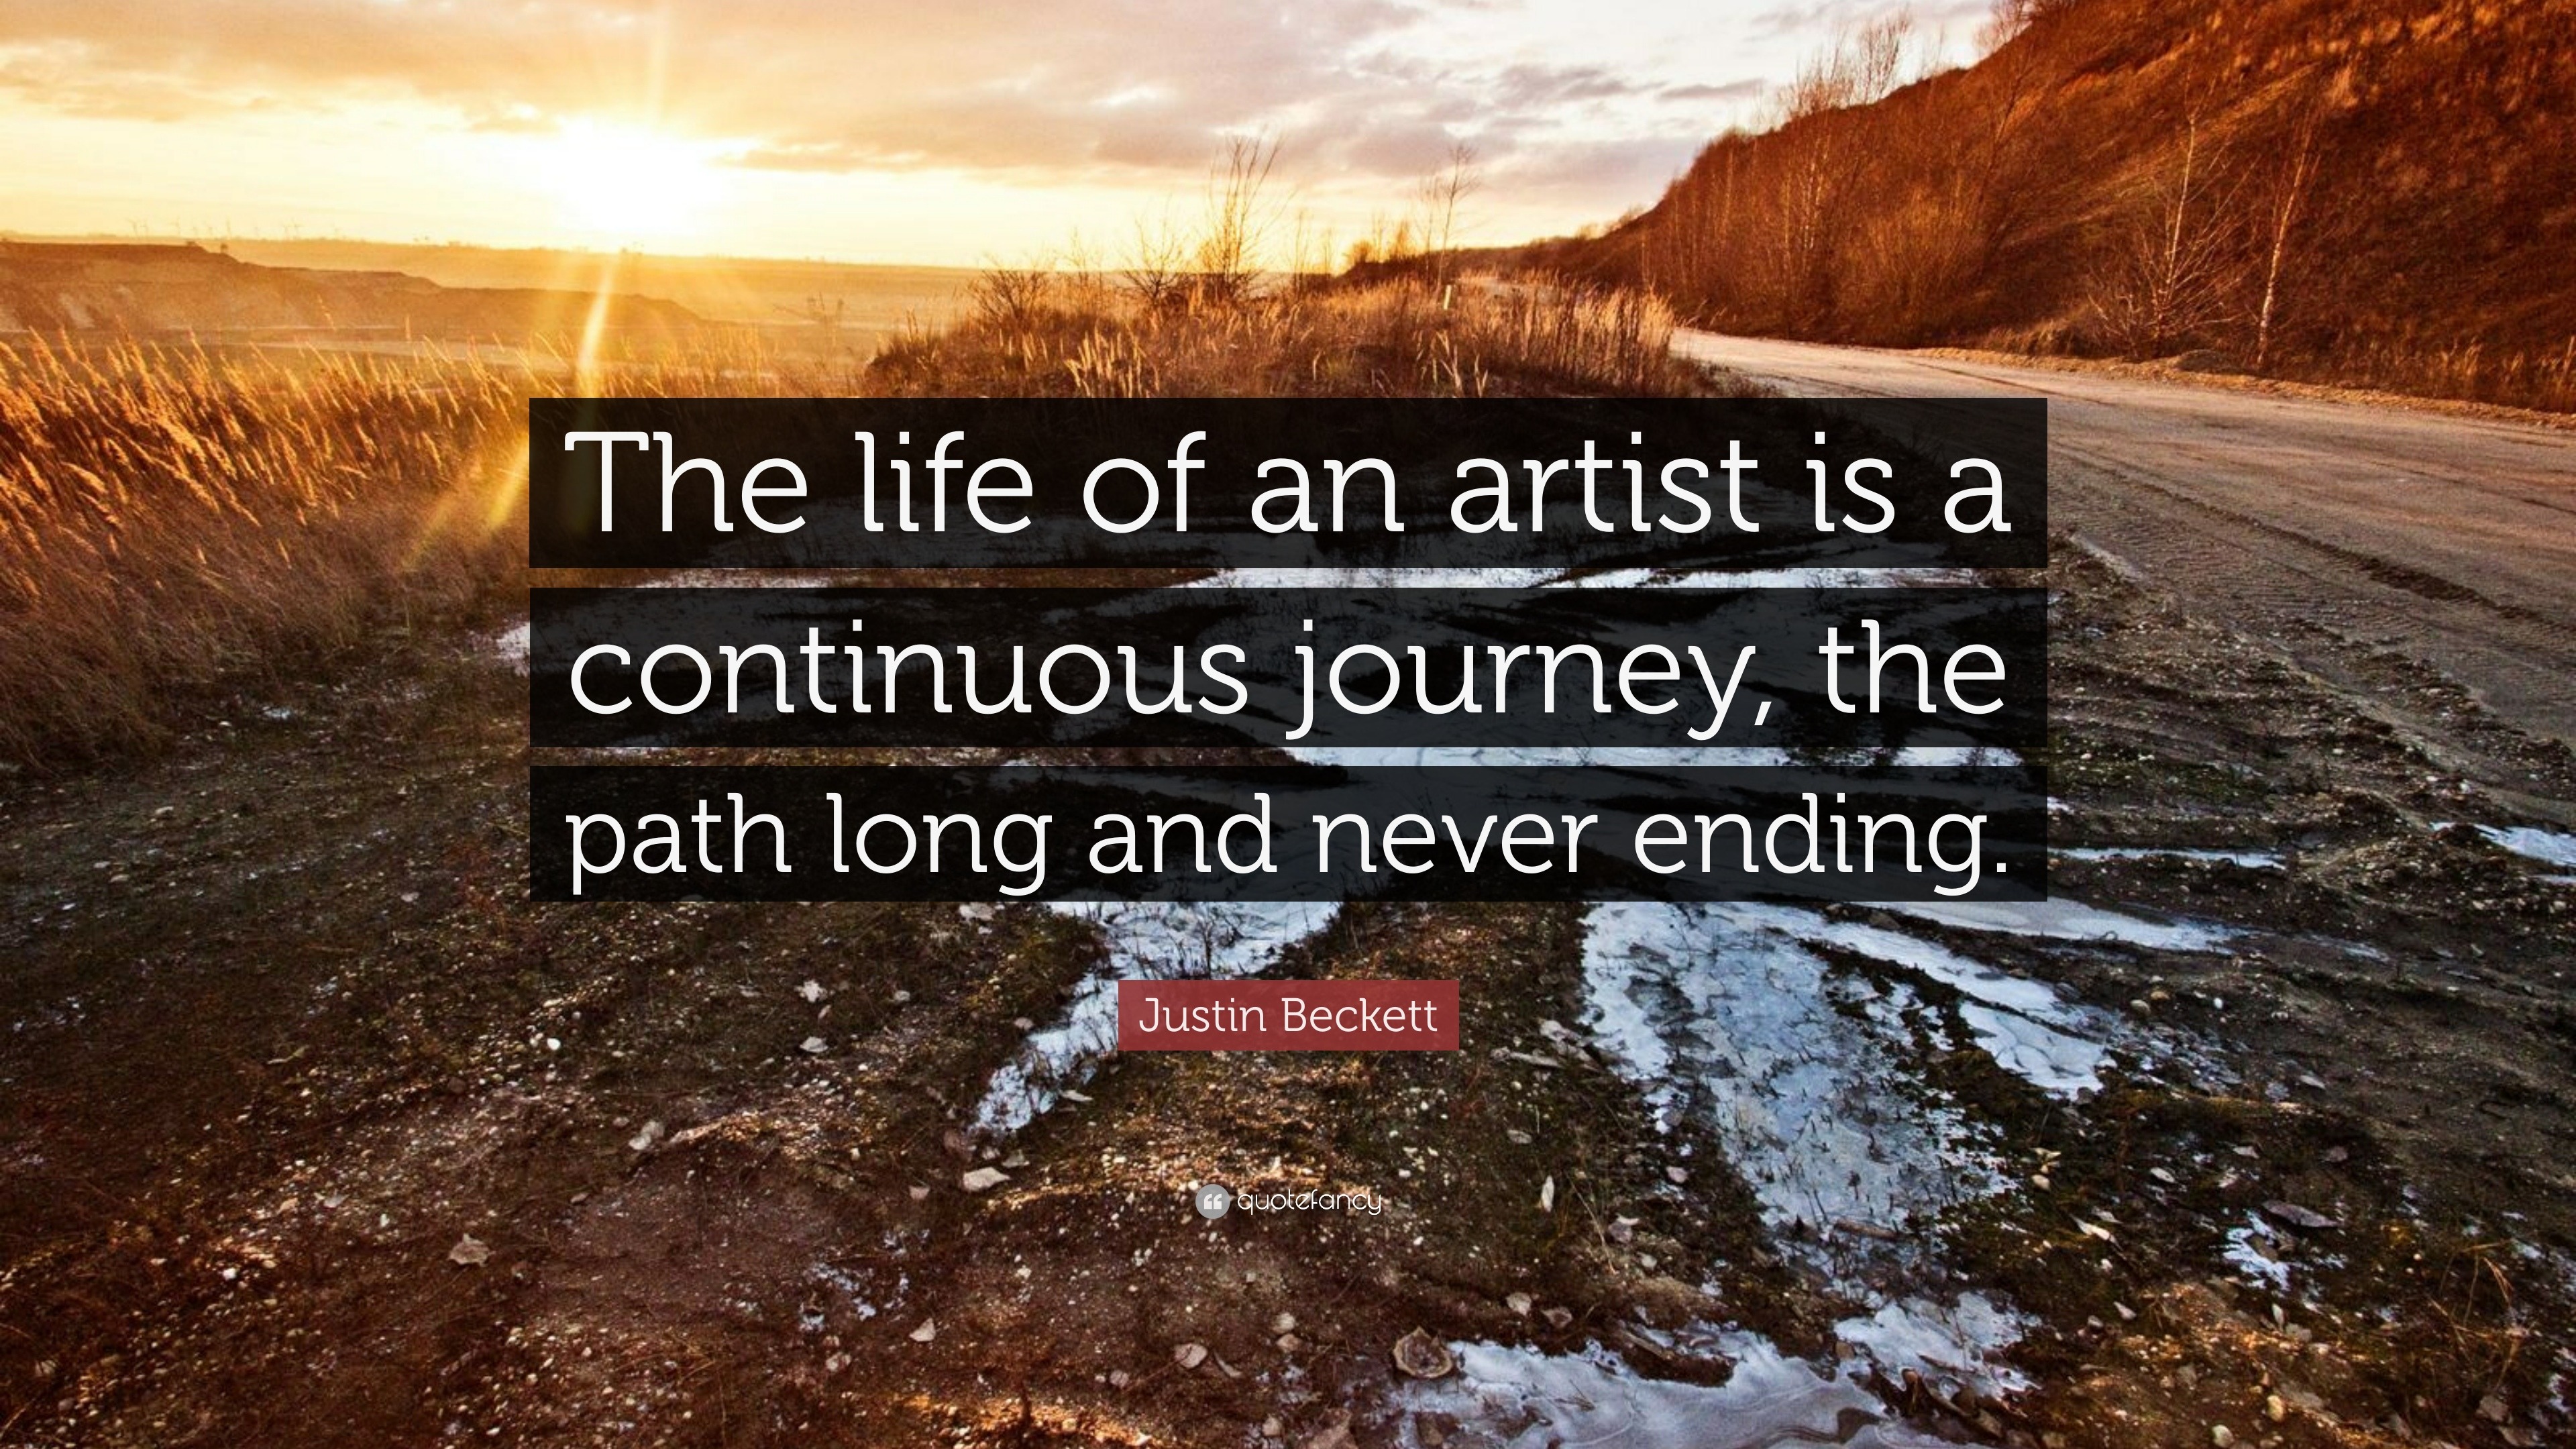 artist quote about journey